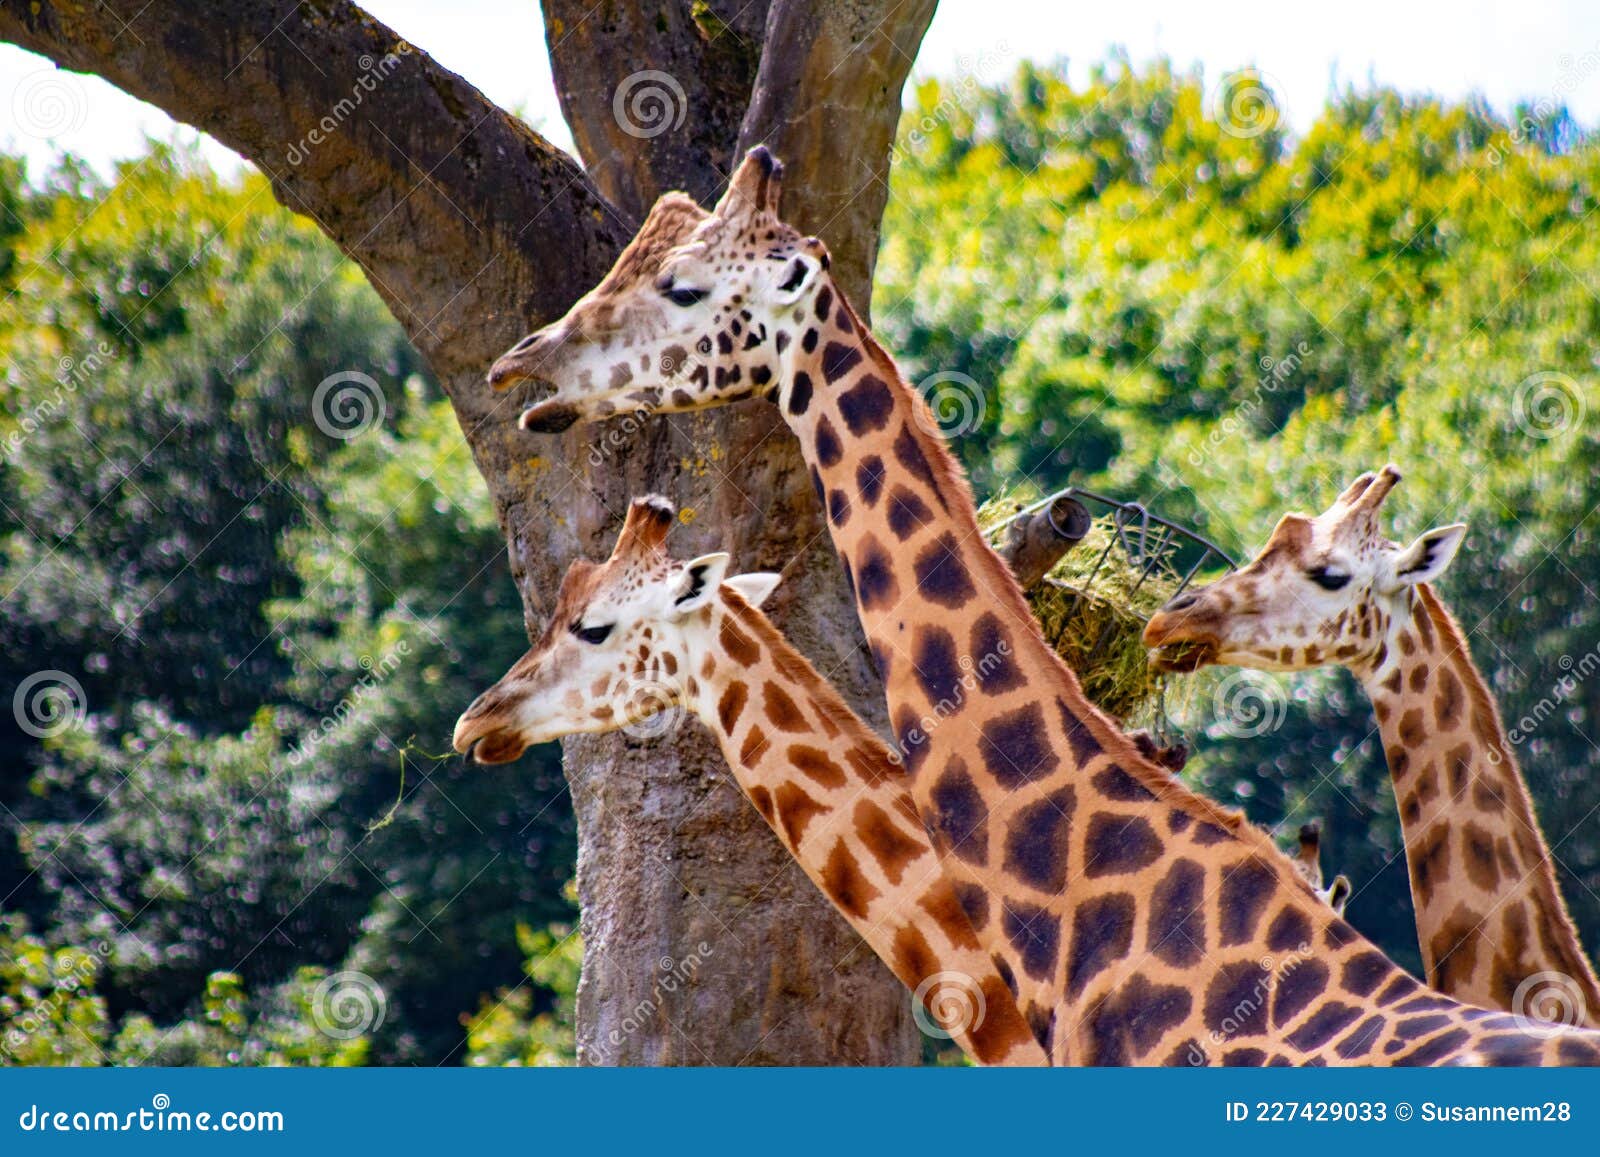 Zoo Photos - Free & Stock Photos from Dreamstime